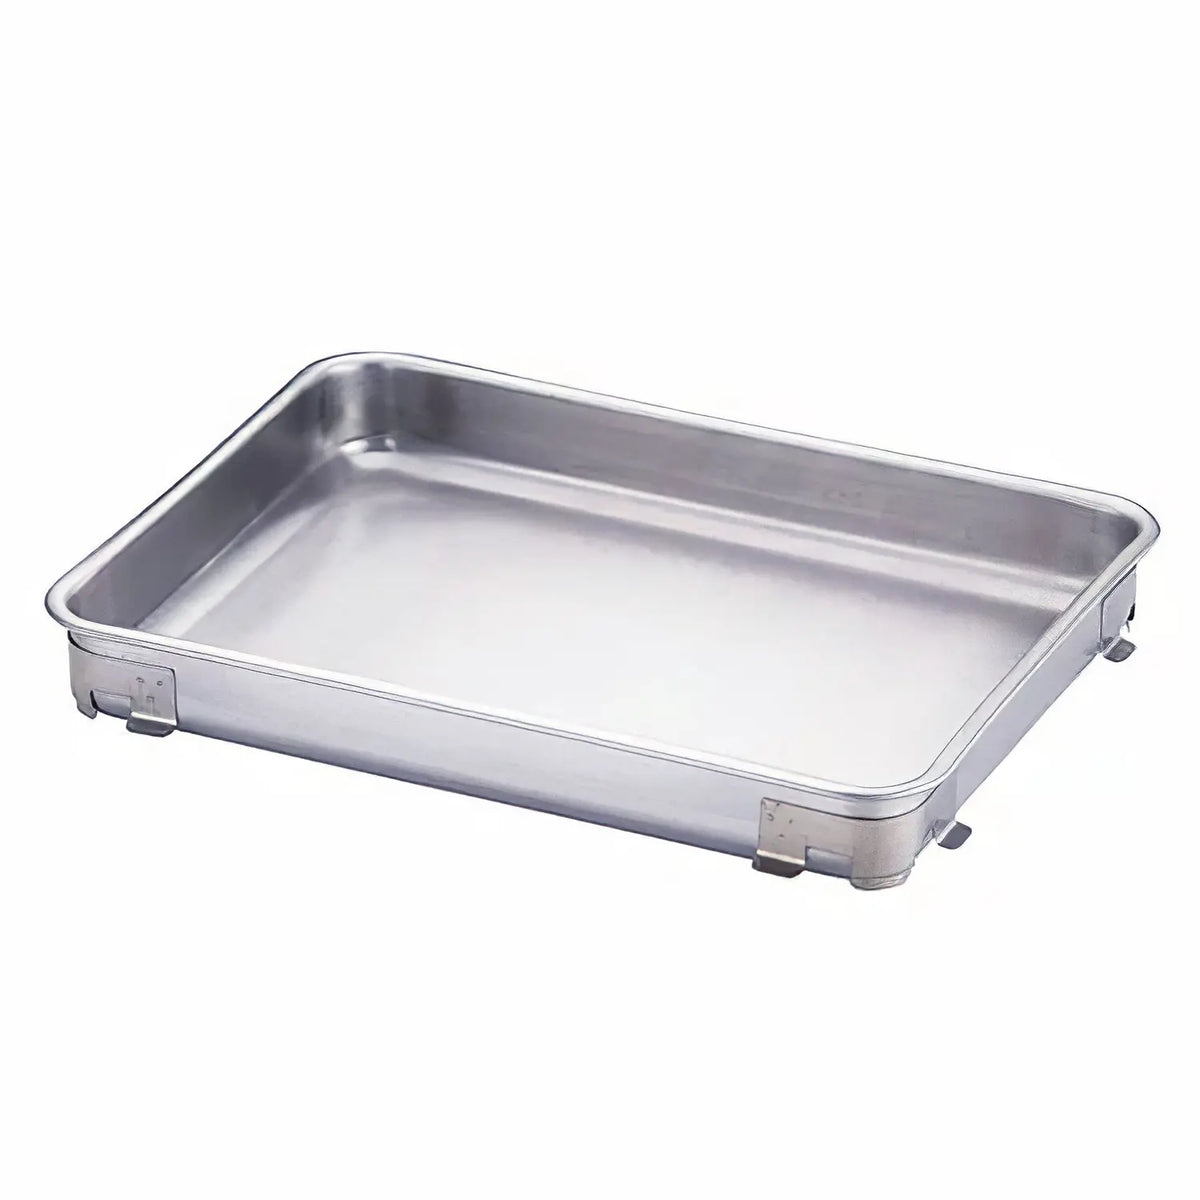 IKD ecoclean Stainless Steel Stackable Tray for Perishables